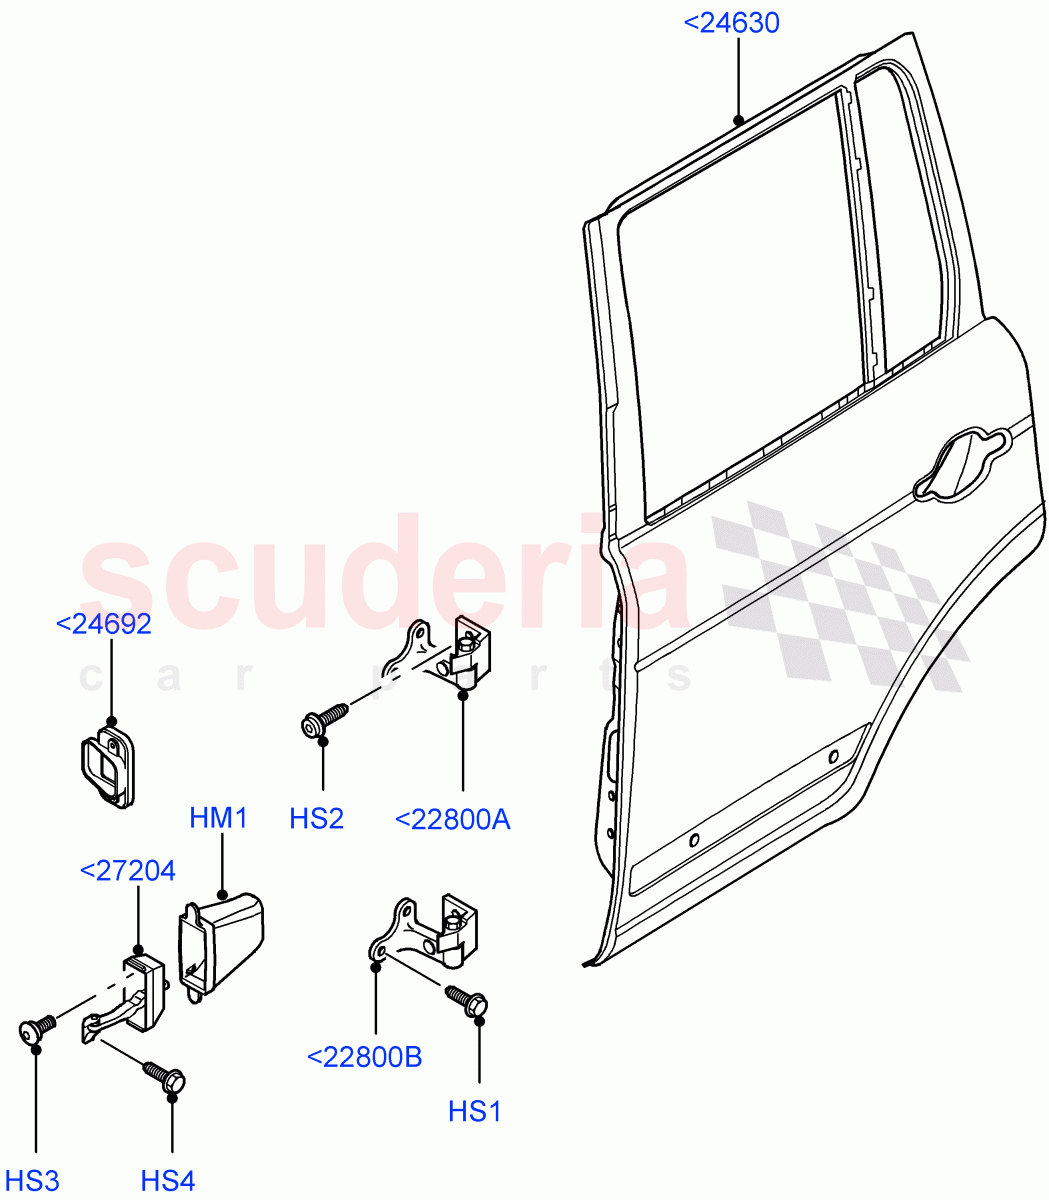 Rear Doors, Hinges & Weatherstrips(Door And Fixings)((V)FROMAA000001) of Land Rover Land Rover Range Rover (2010-2012) [3.6 V8 32V DOHC EFI Diesel]